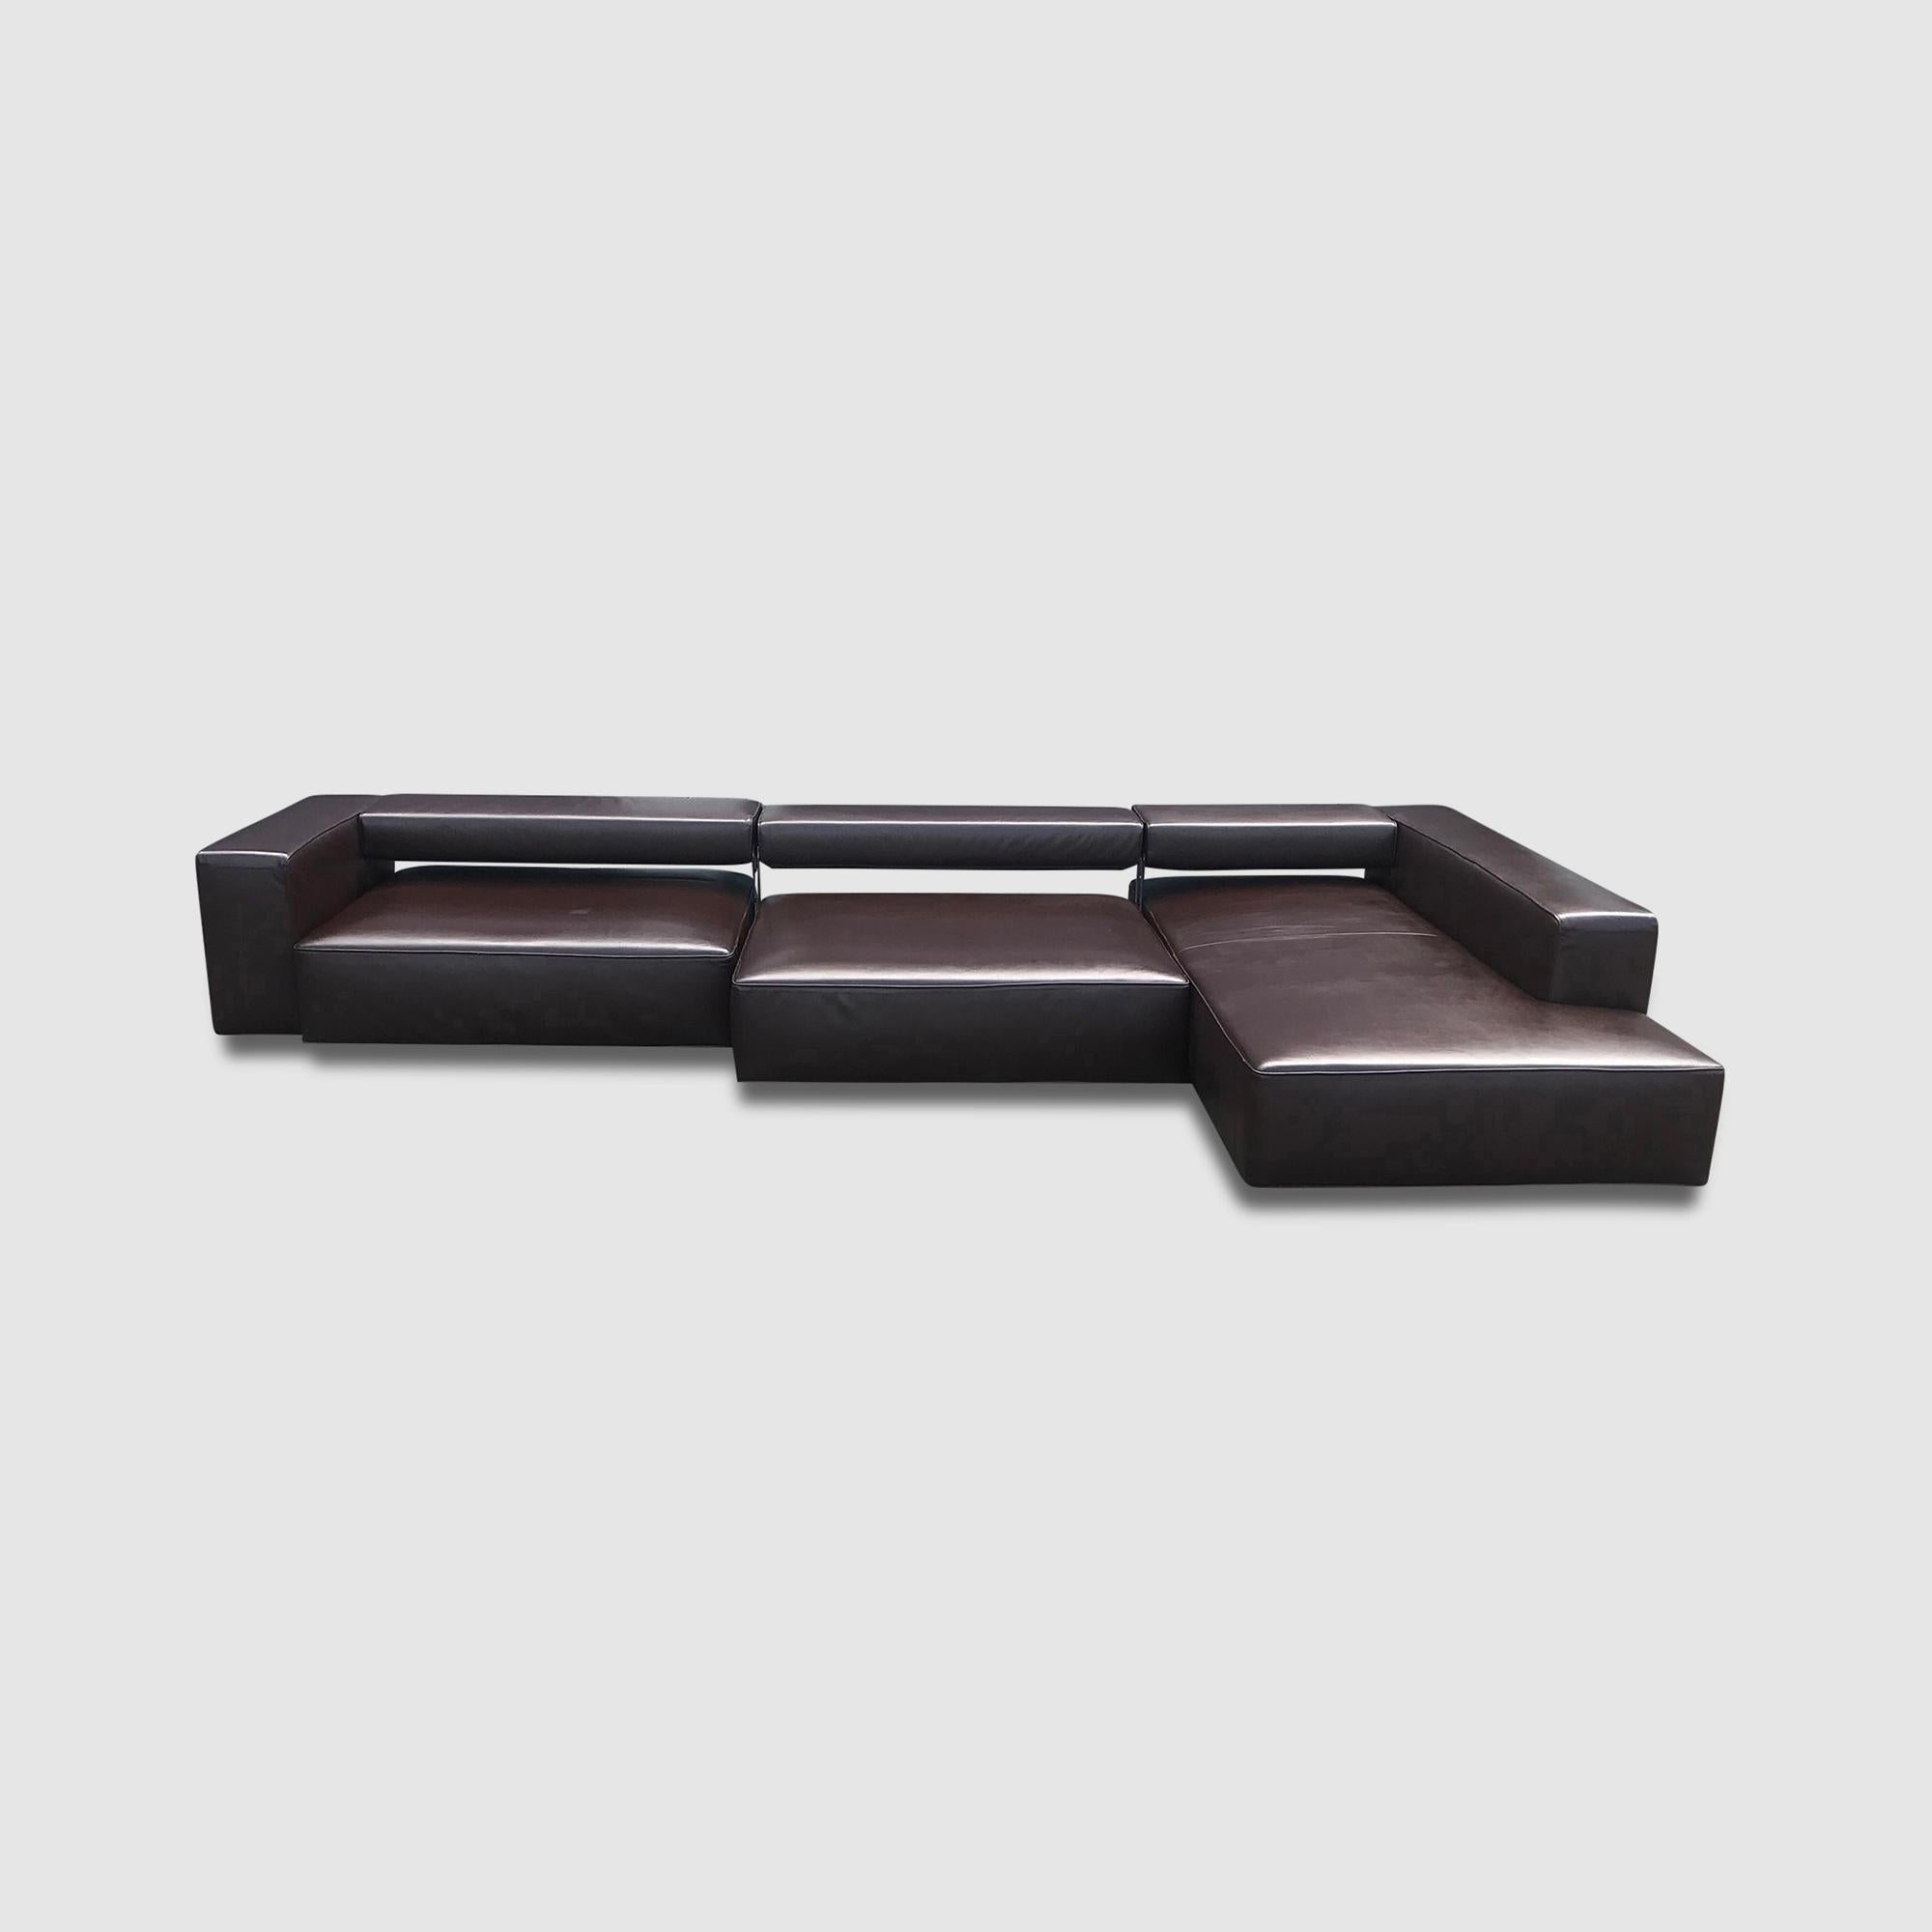 Hugely impressive top of the line sofa by Paolo Piva for B&B Italia. Designed in 2023 by Piva, this design was his last work before retiring finally. He passed away 4 years after.

The quality and finish of this sofa is absolutely high class in